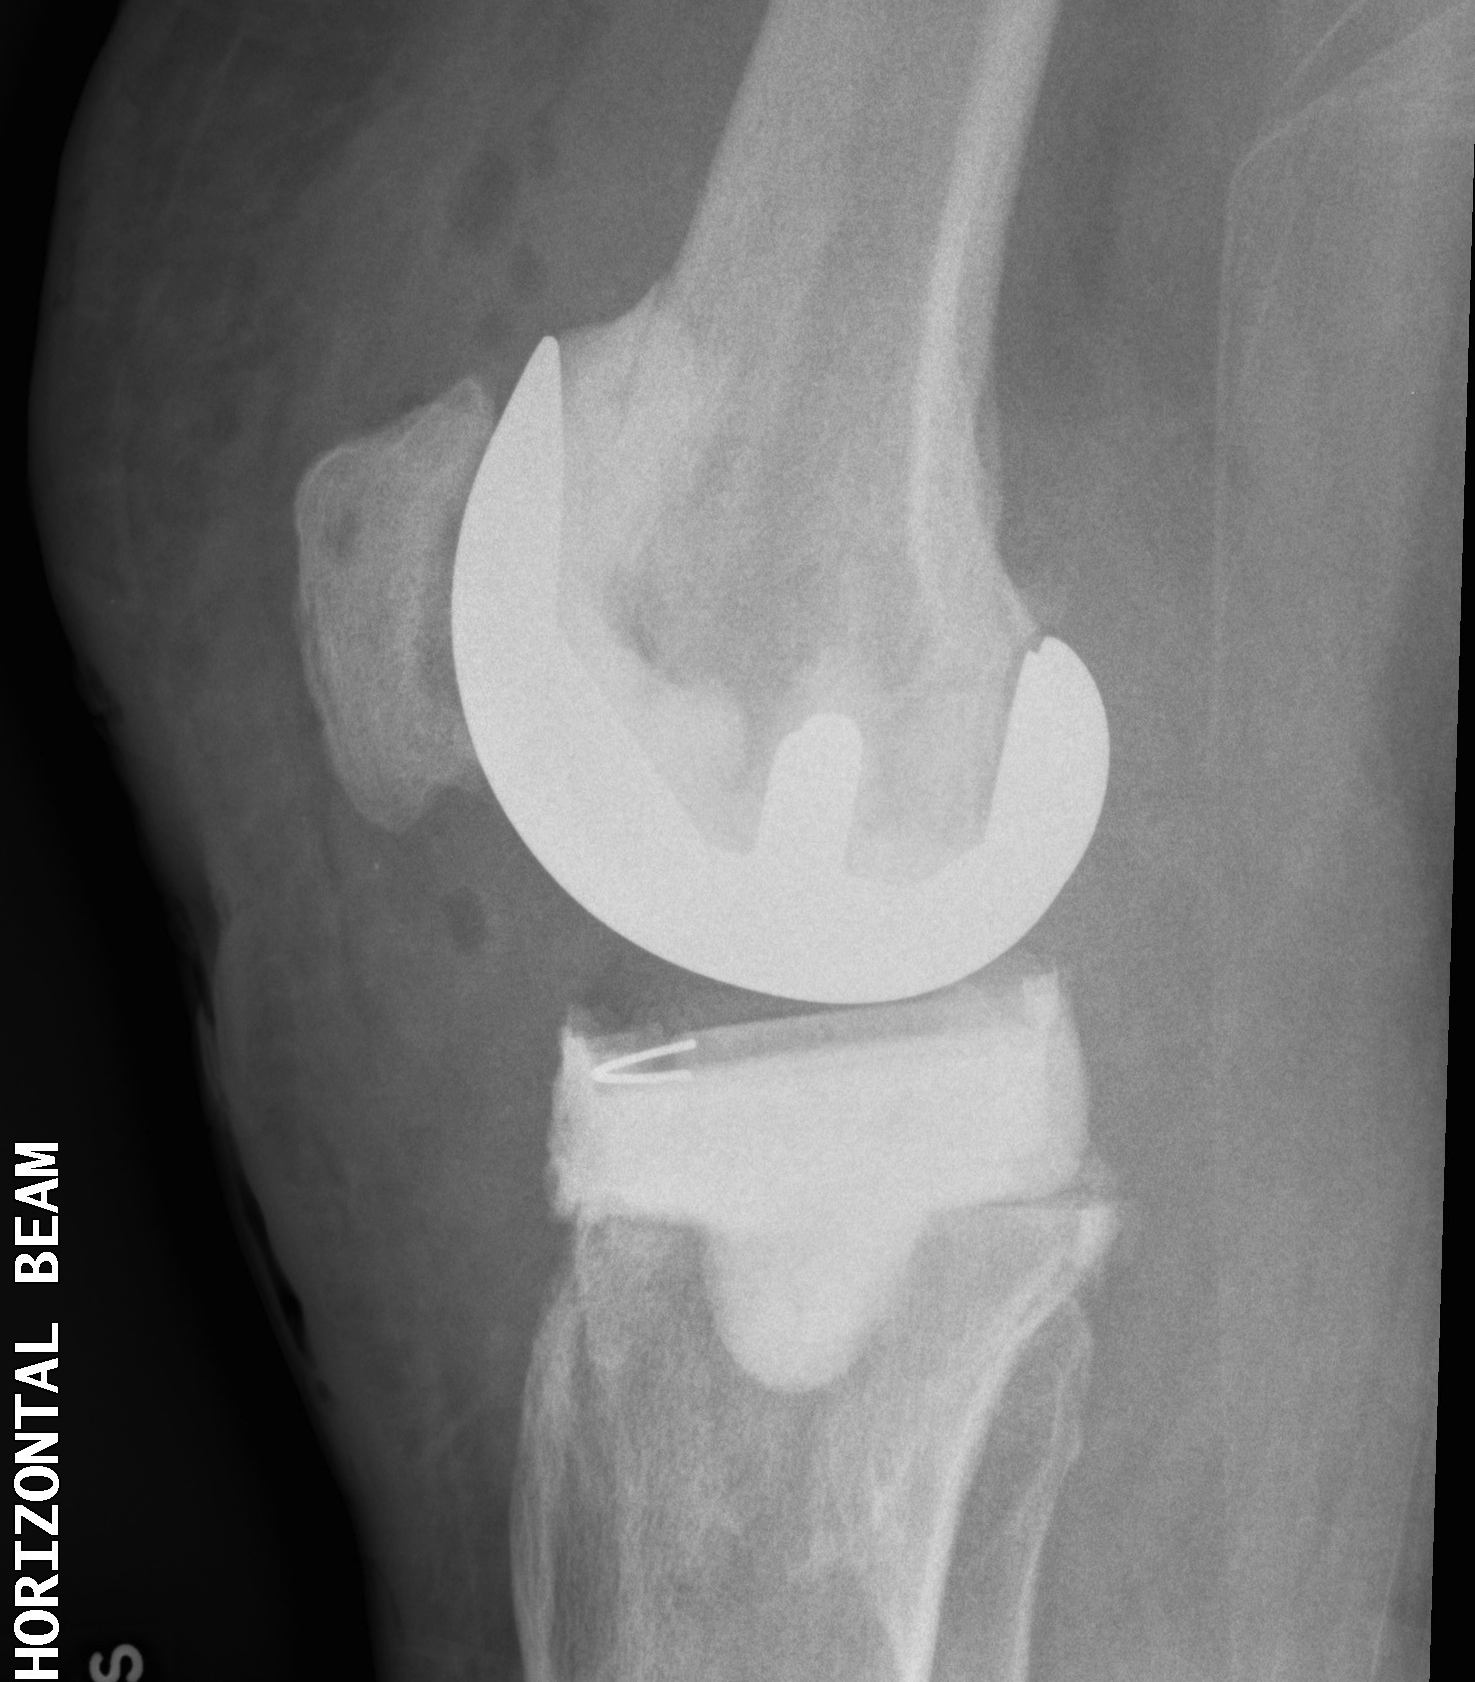 Infected TKR Autoclave Femur Cement Tibia Lateral